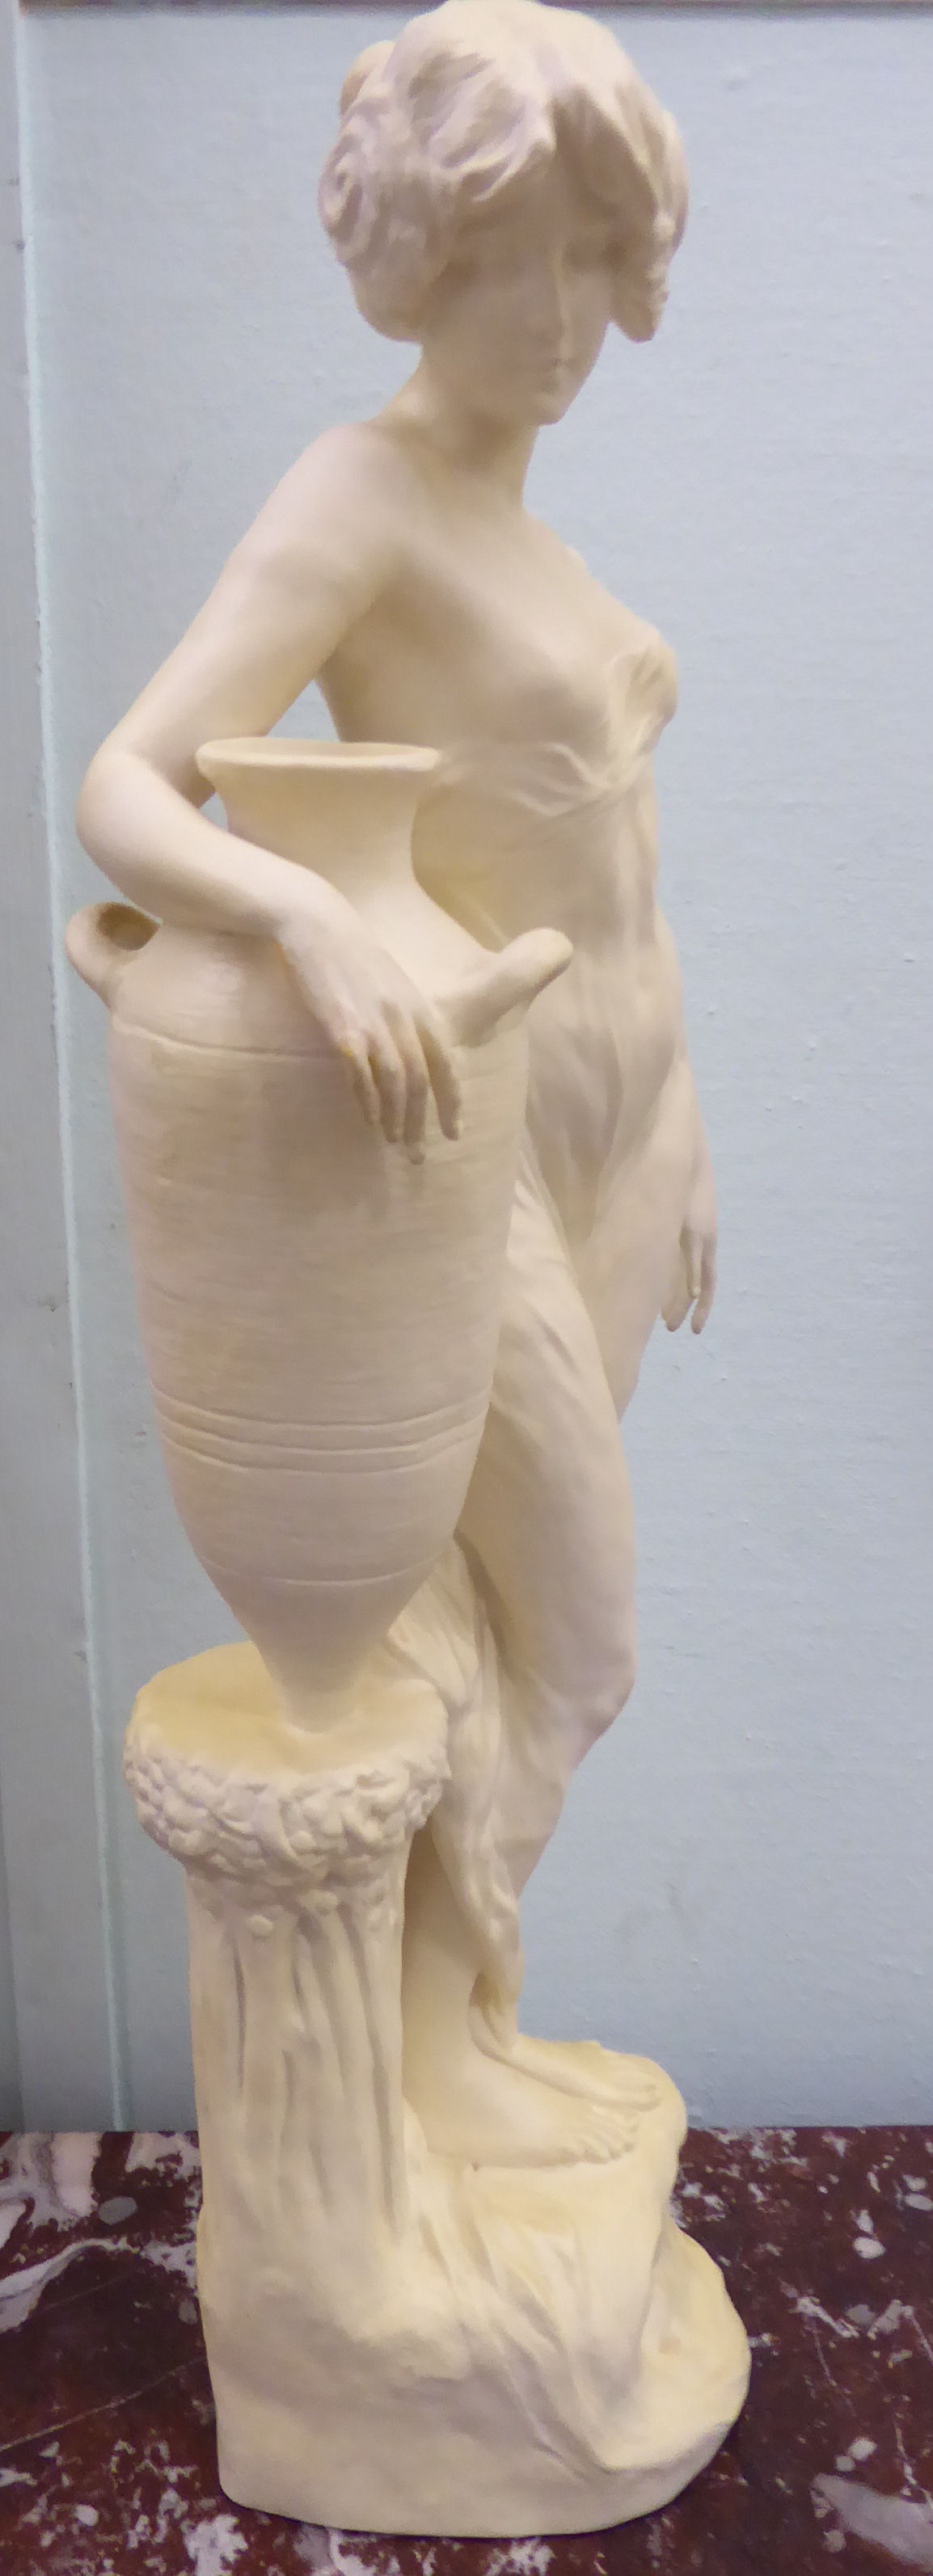 An unglazed standing plaster figure 'Aphrodite' holding a water vessel, - Image 4 of 16